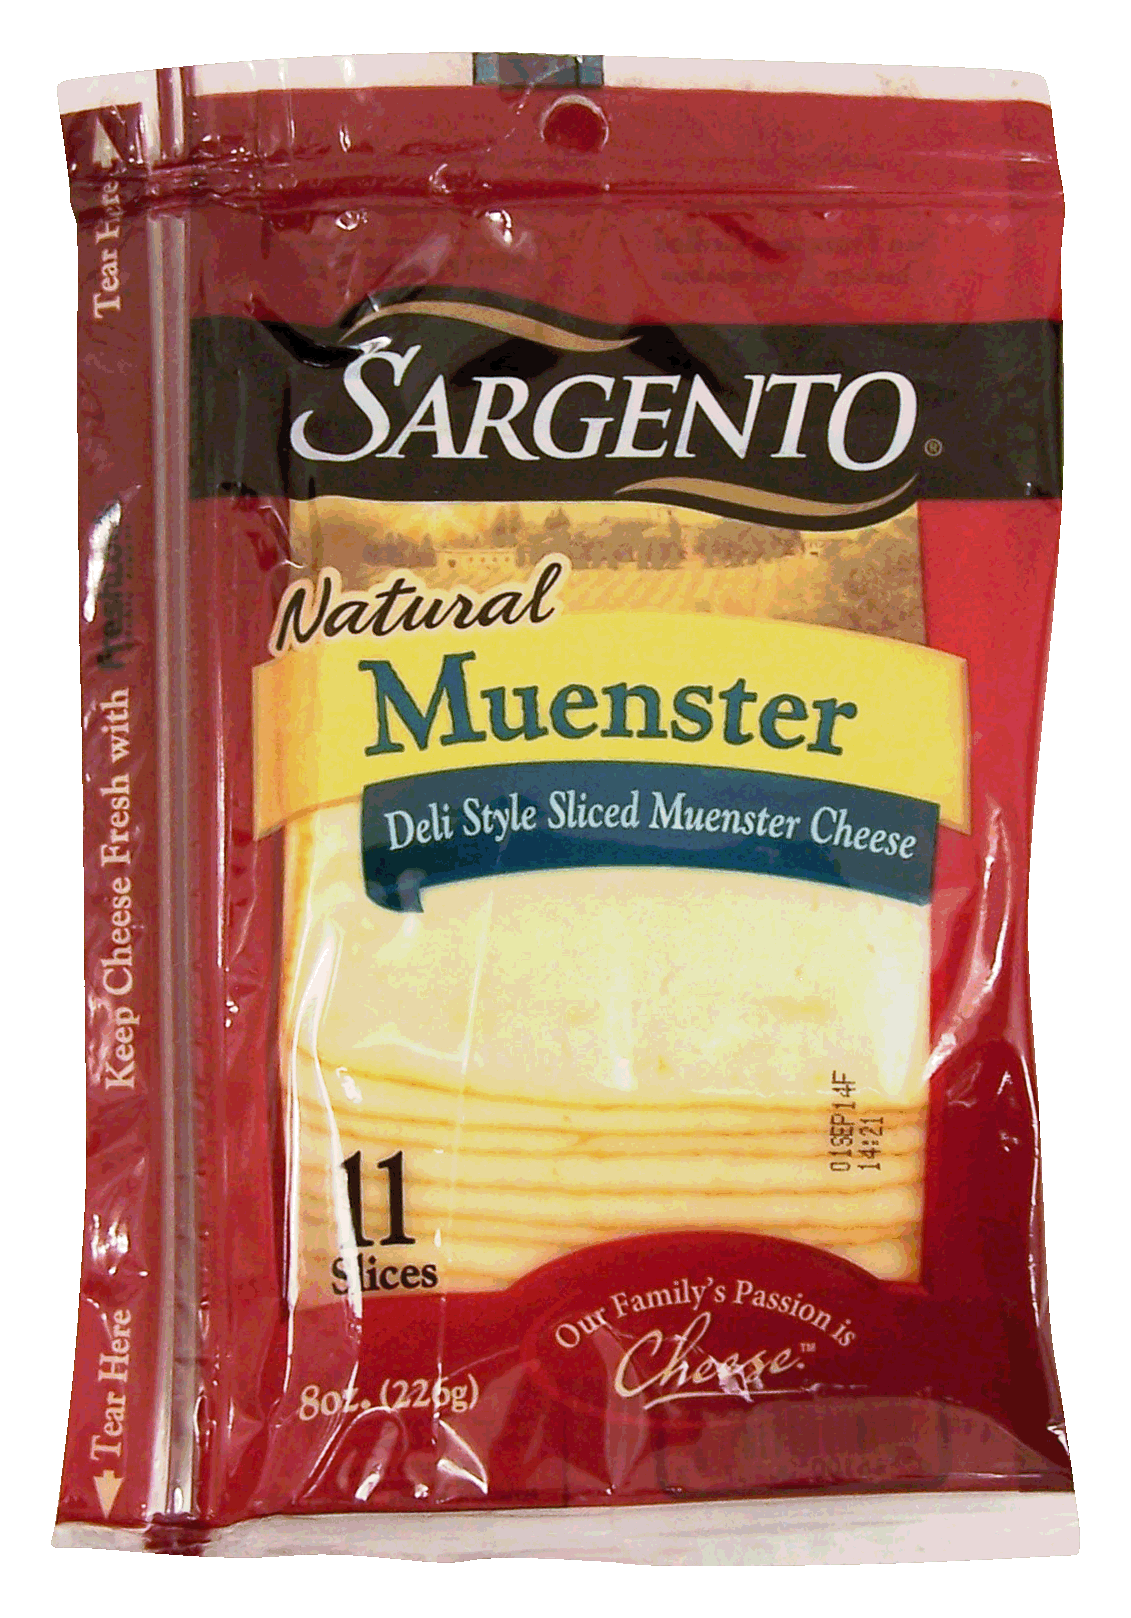 Sargento(R) Natural Deli Style Muenster Thin Slices 11 Ct Full-Size Picture